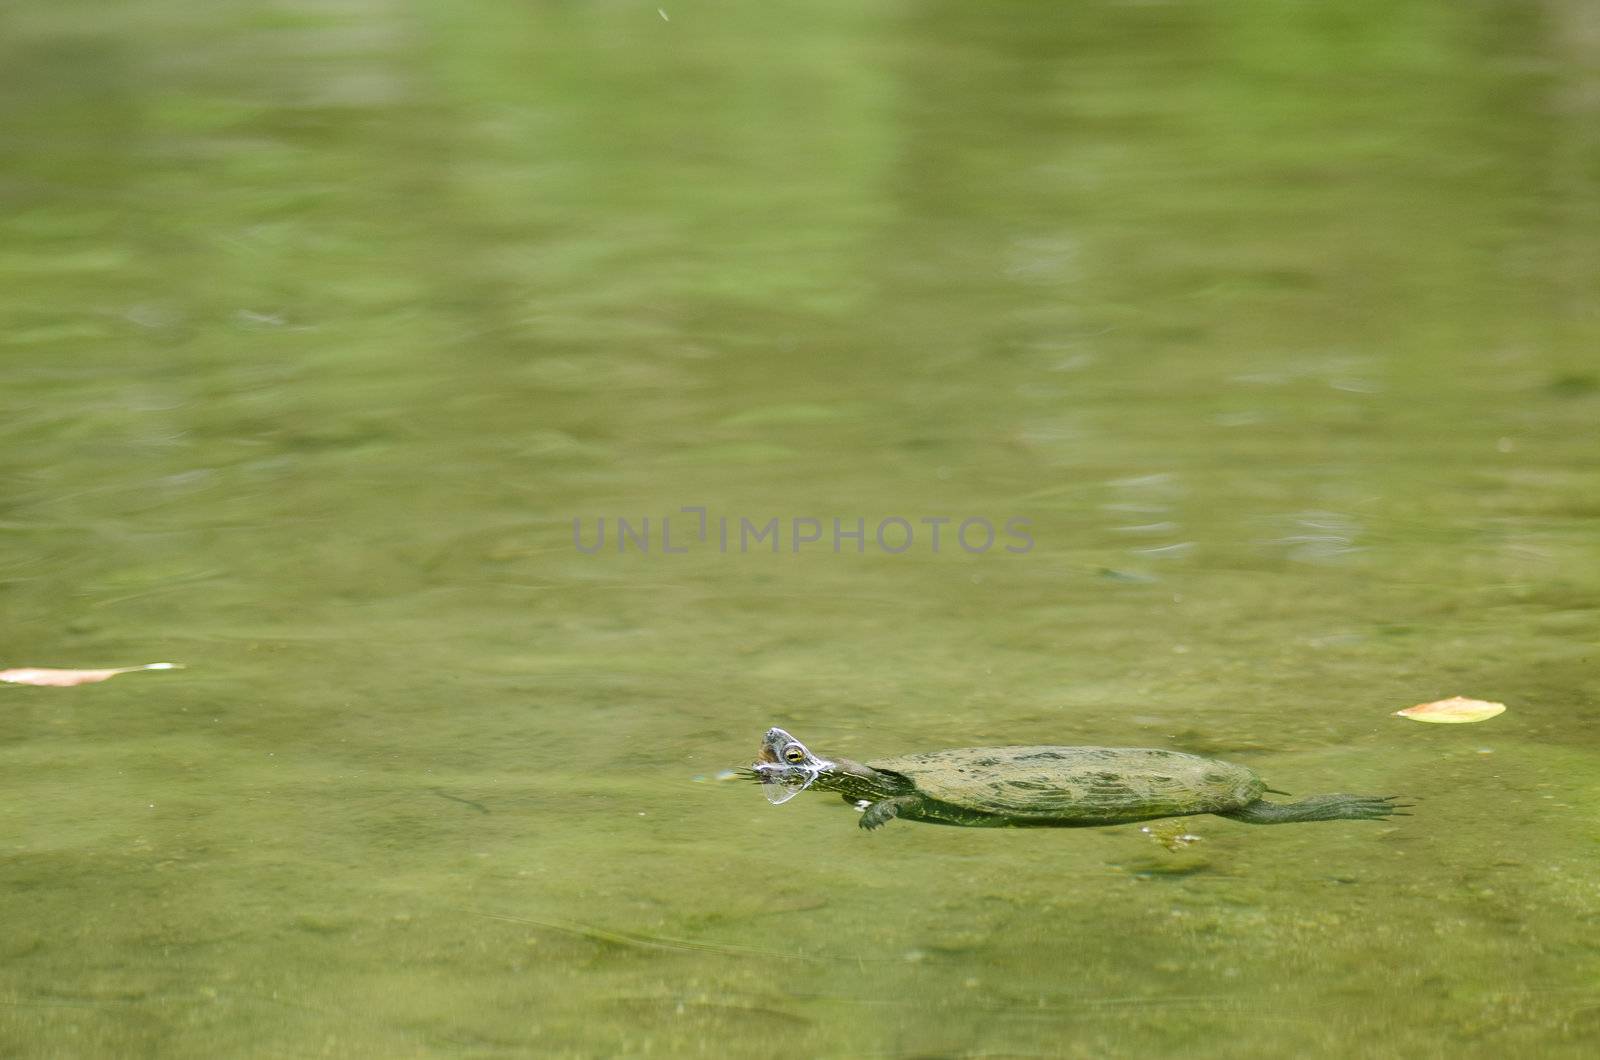 Chinese pond turtle, Mauremys reevesii by Arrxxx